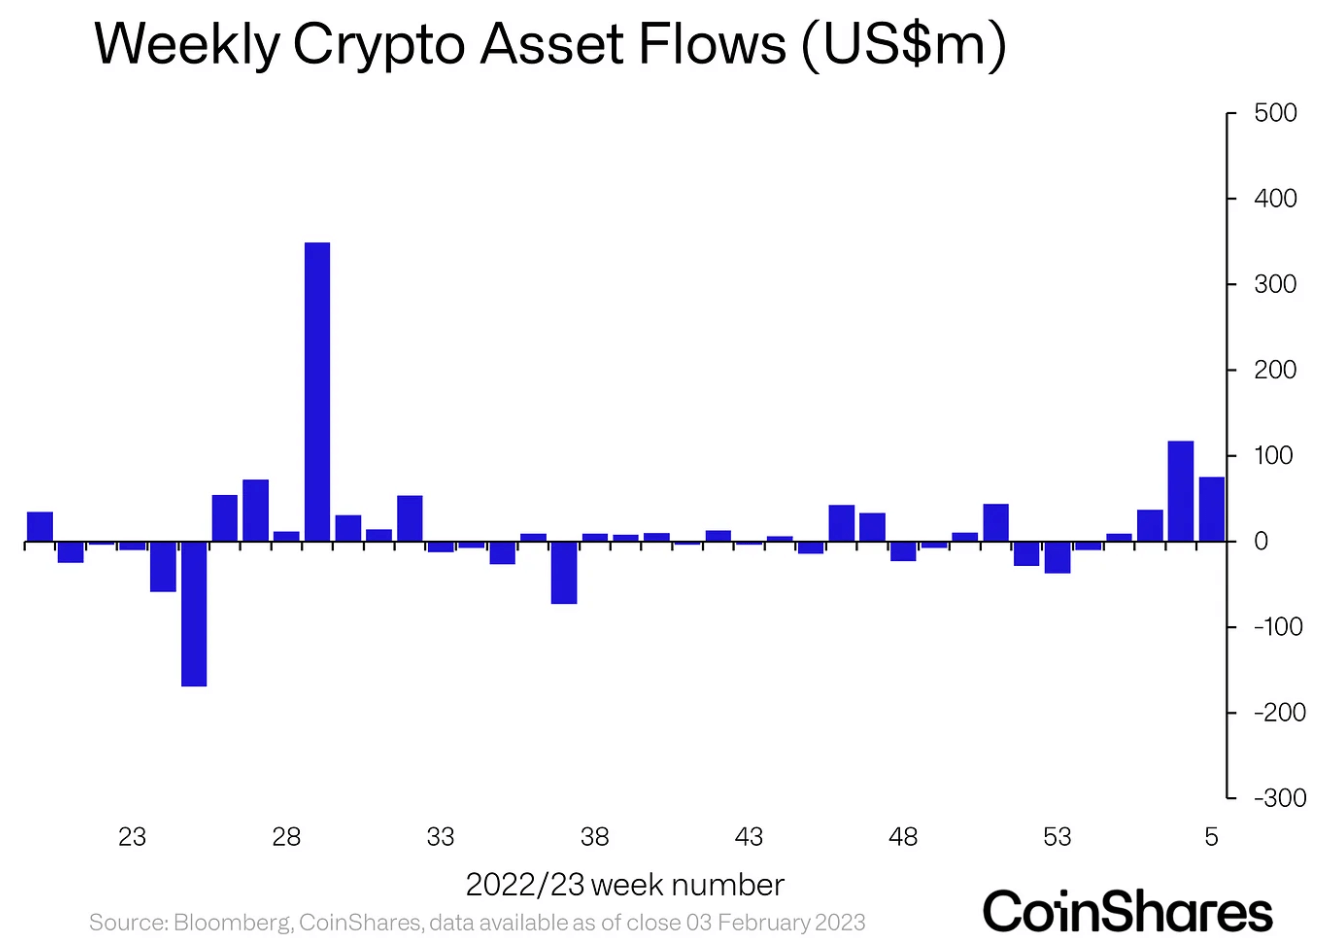 Weekly Crypto Asset Inflows